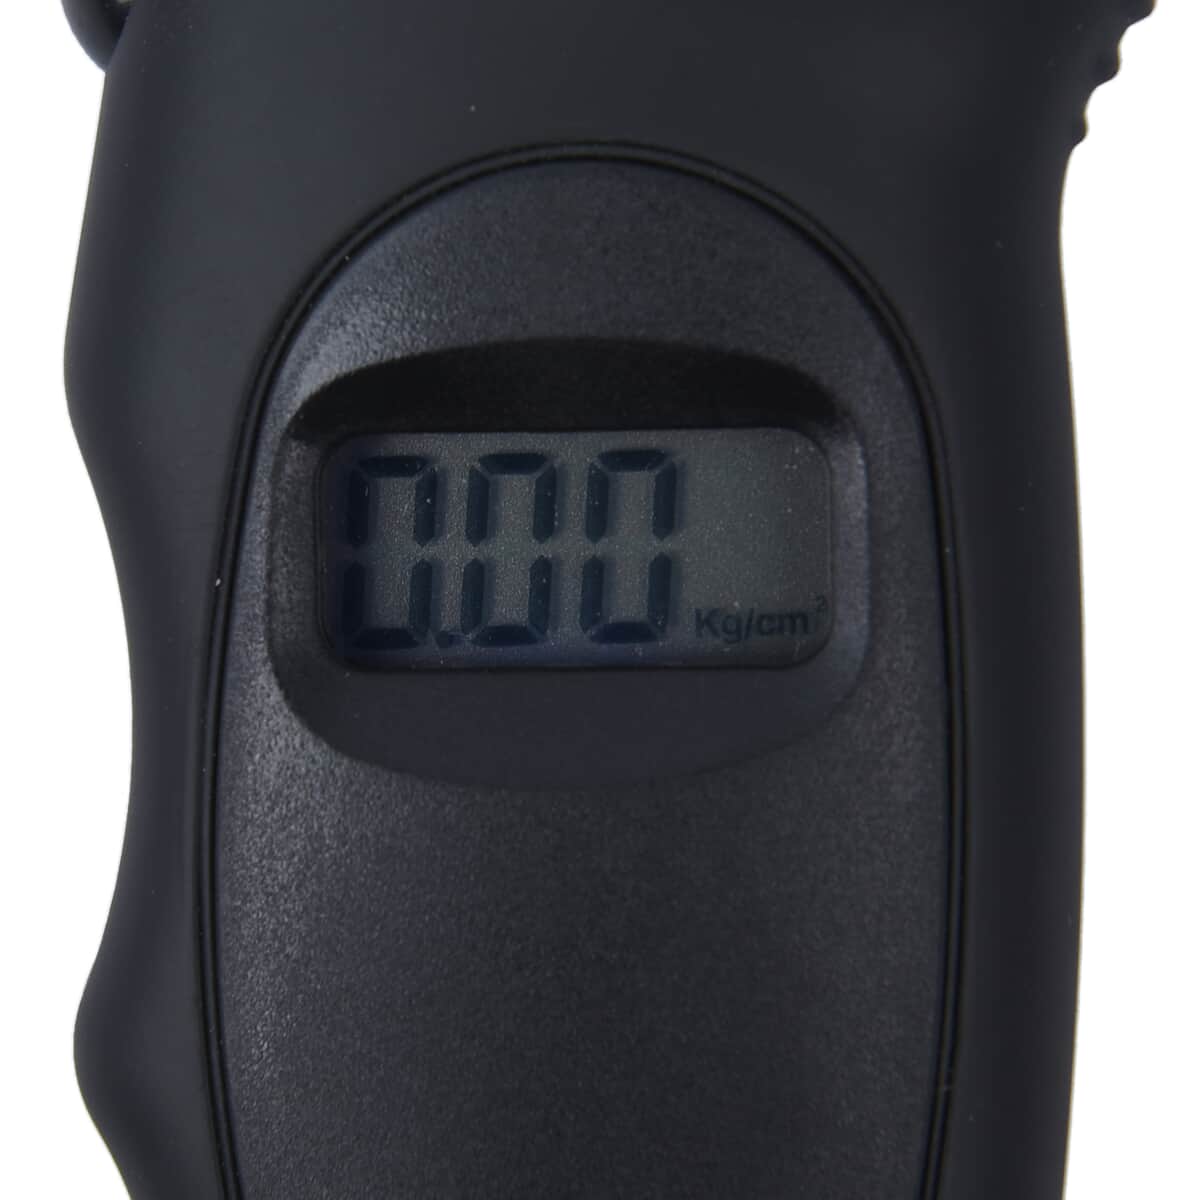 Heavy Duty Battery Operated Black Digital Tire Pressure Gauge with Backlit LCD Display Screen, Tire Inflator, Lighted Nozzle, Non-slip Handle Grip image number 4